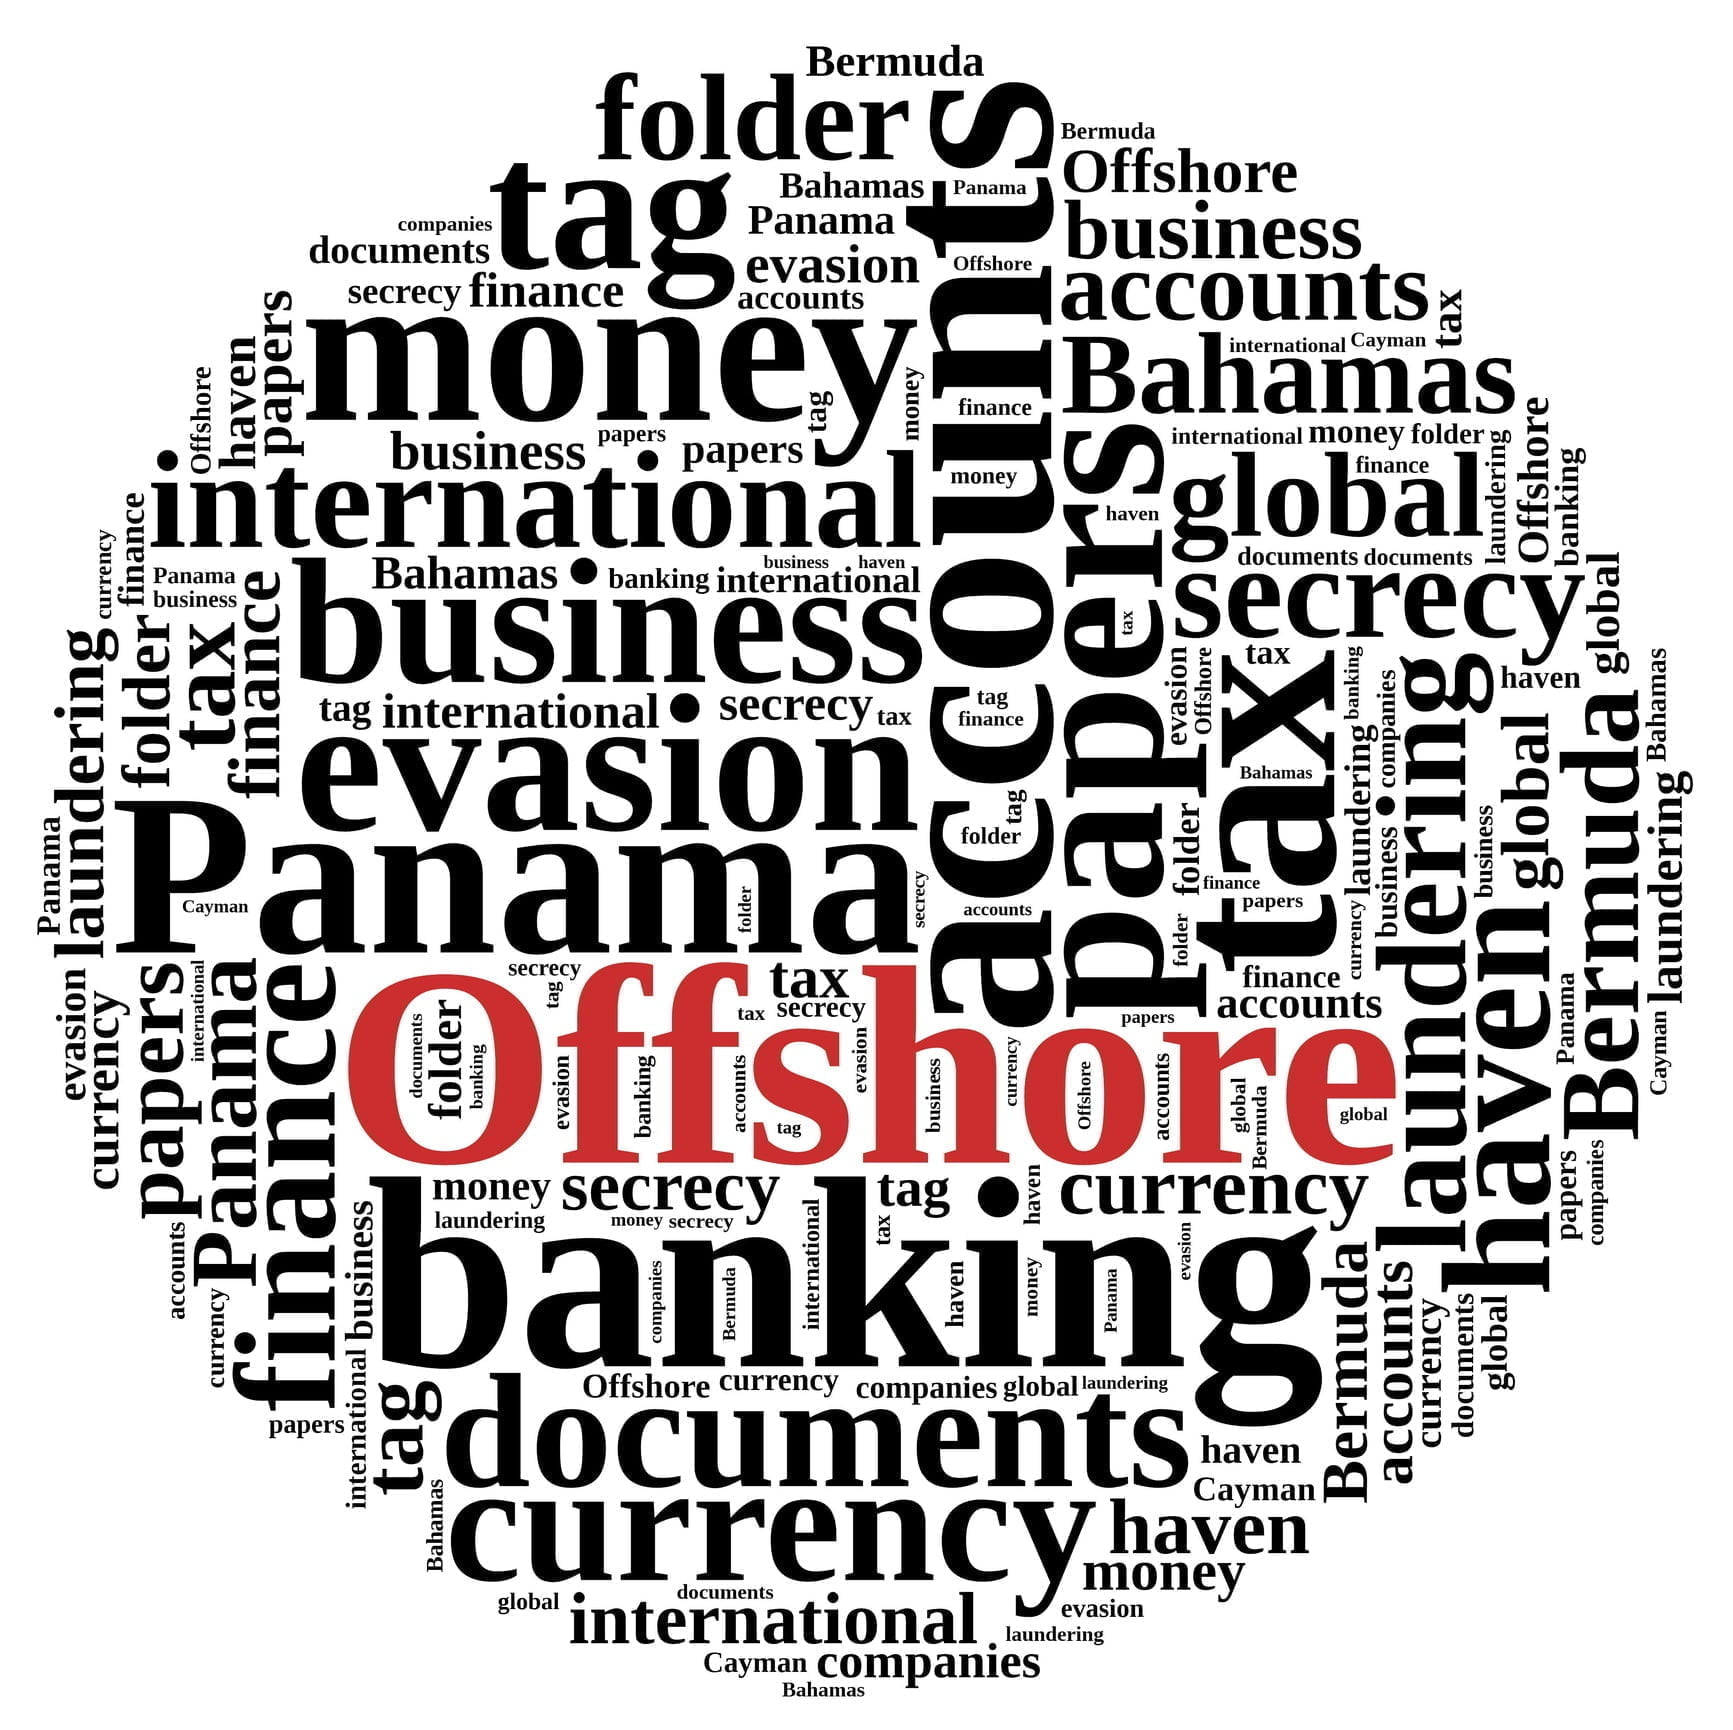 Offshore Bank Accounts and Investments